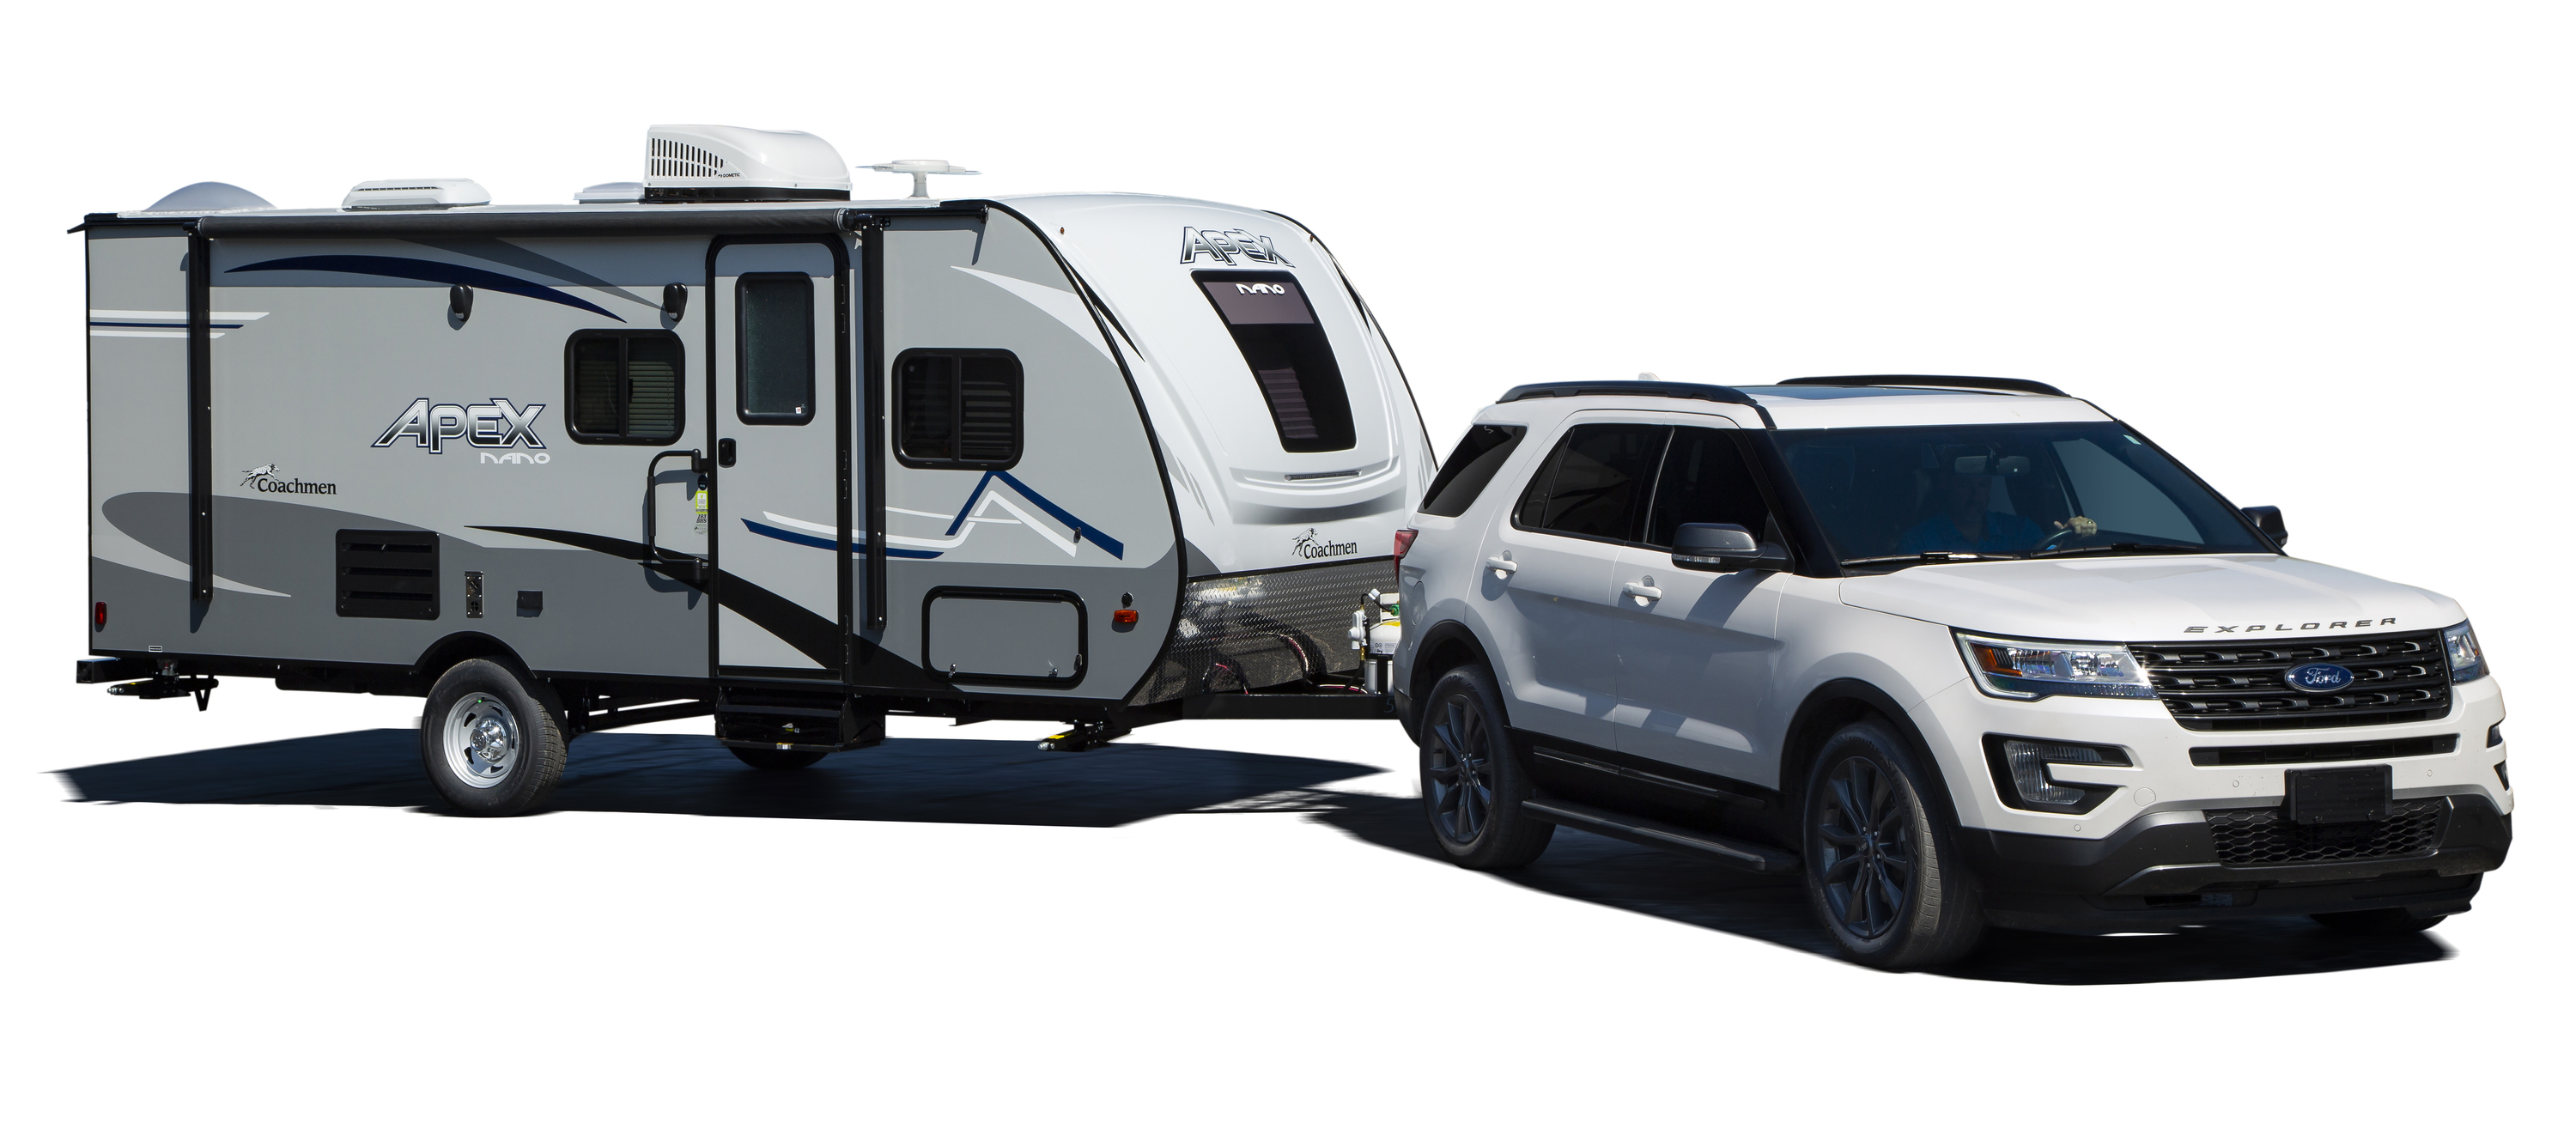 Car towing a travel trailer against a white background